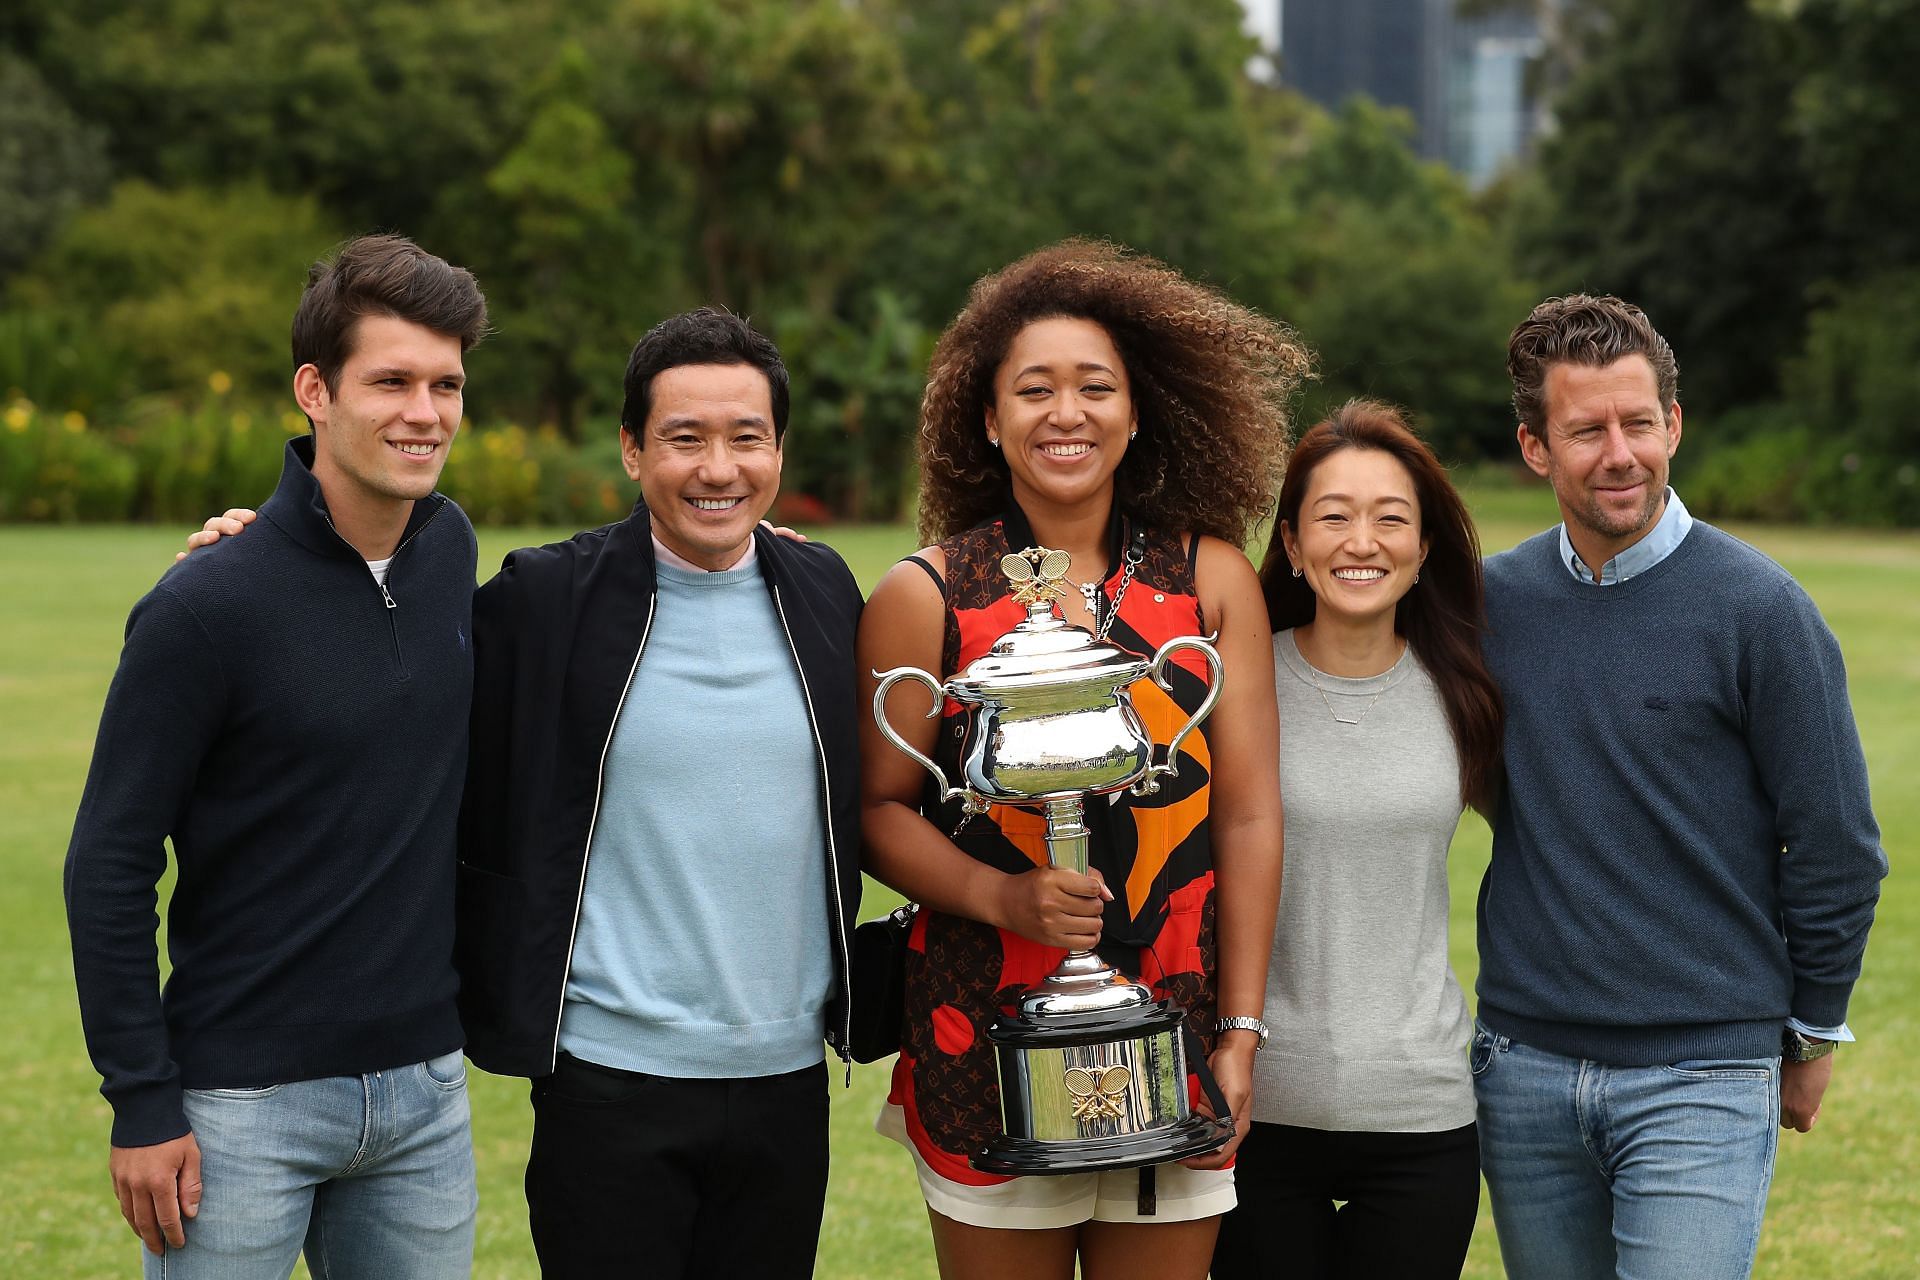 Naomi Osaka poses with her team, including coach Wim Fisette (rightmost), during her photo shoot for winning the 2021 Australian Open title.